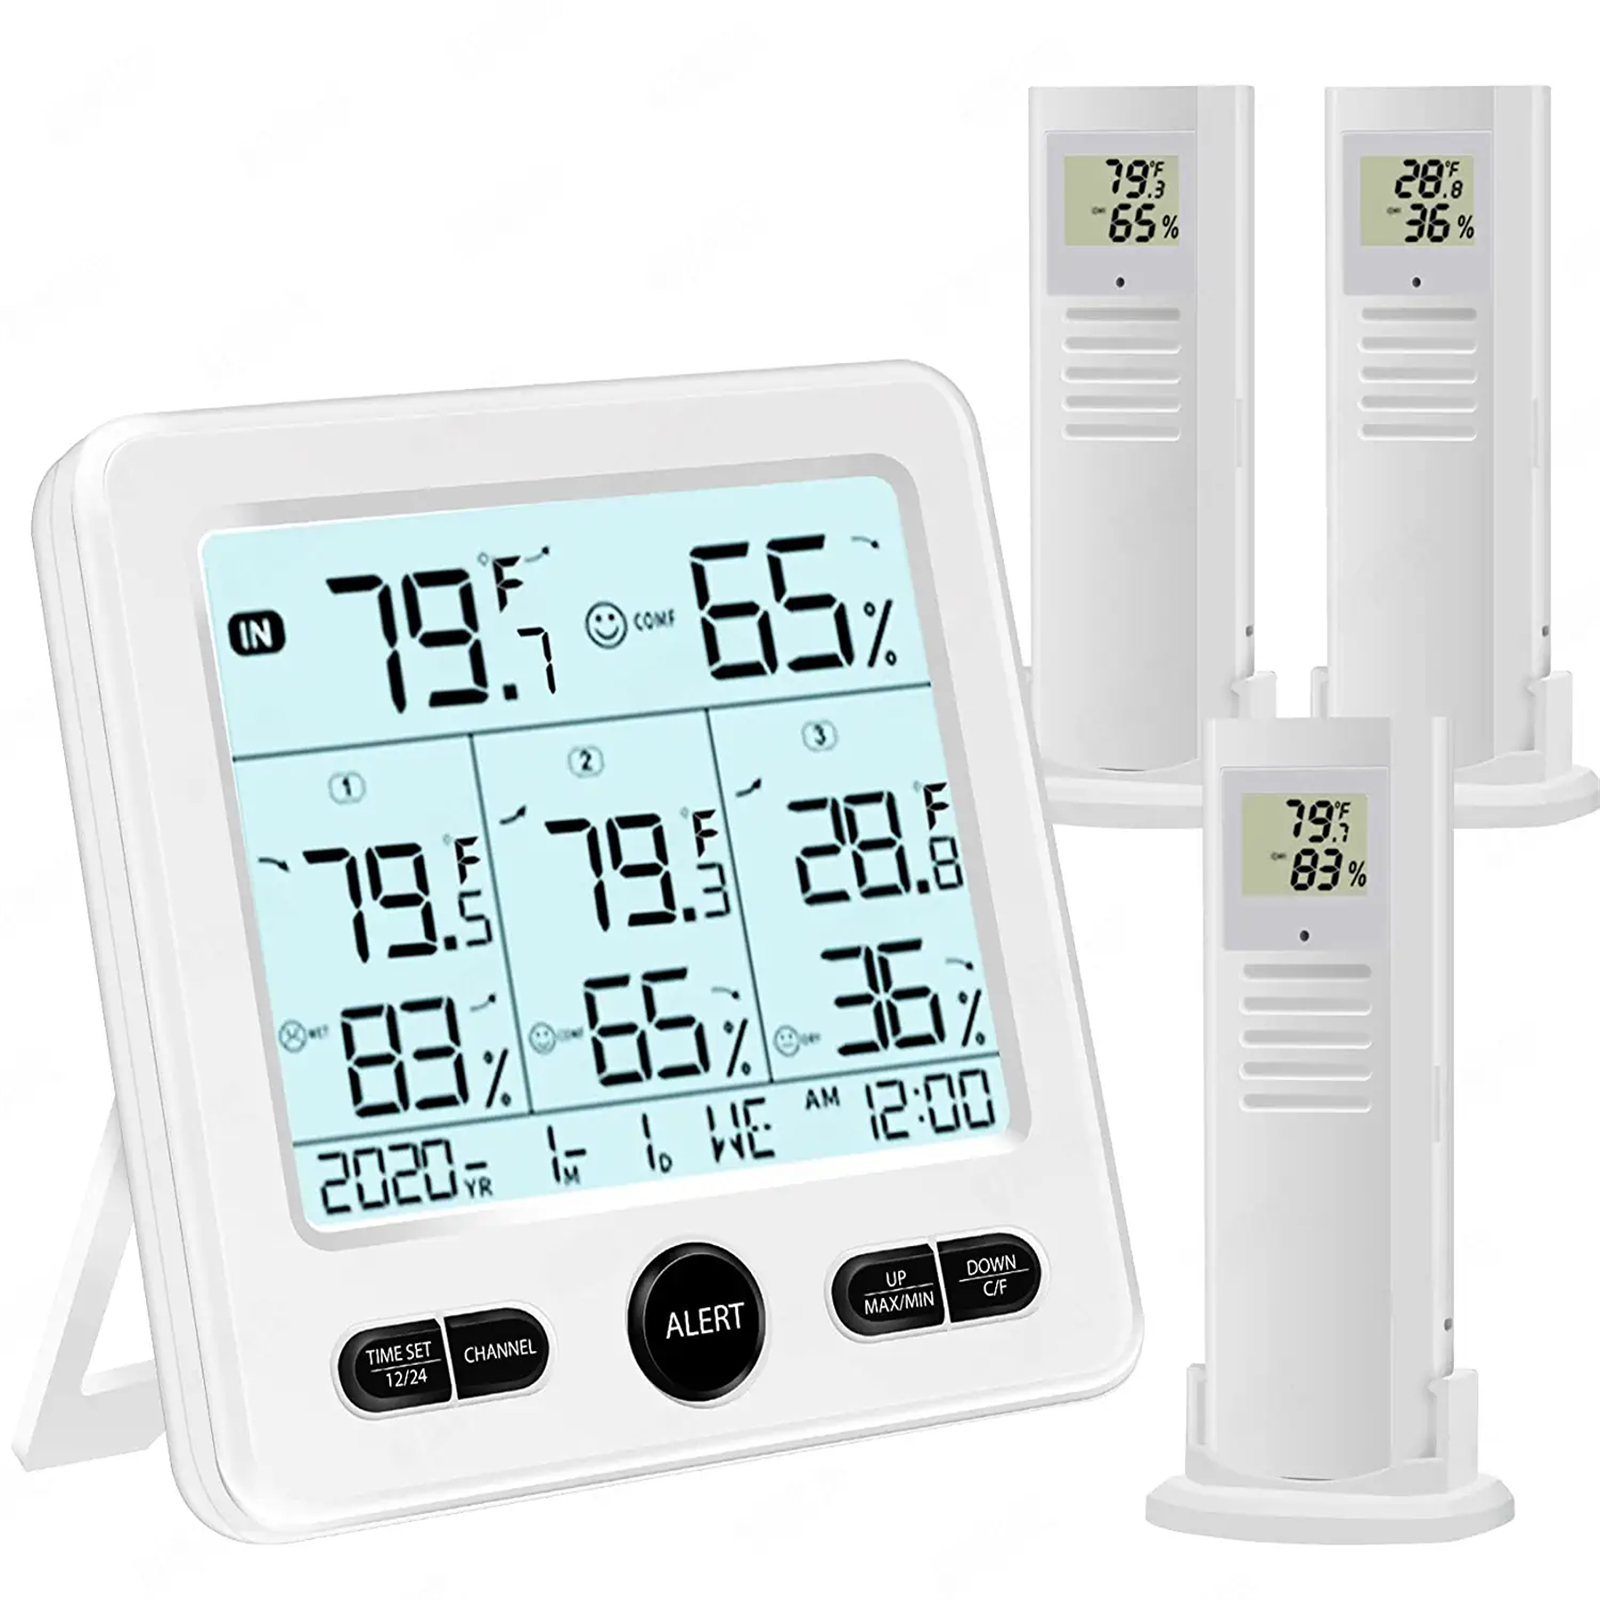 Wireless Thermometer Hygrometer Large Screen Temperature Humidity Monitor Meter